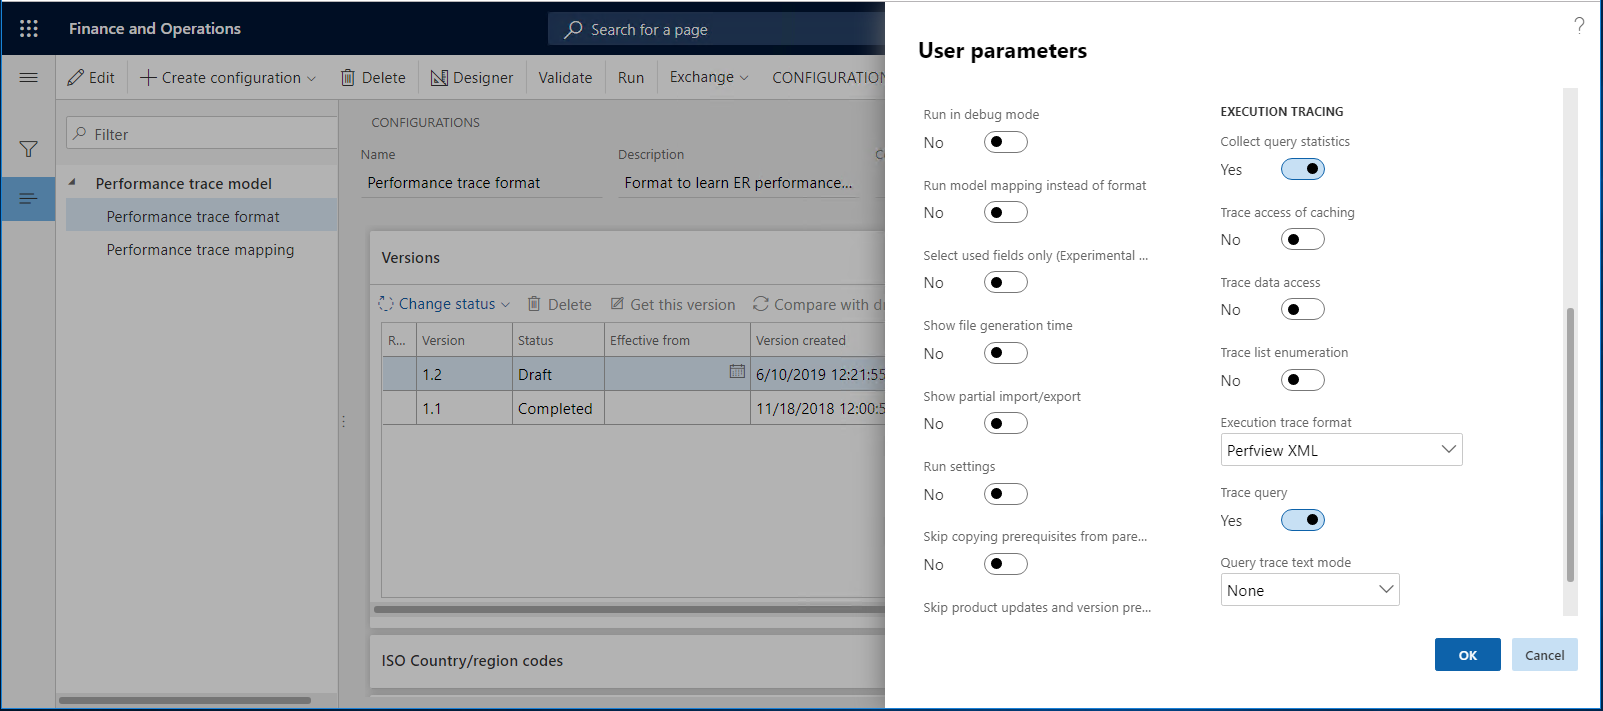 Execution tracing section, User parameters dialog box.